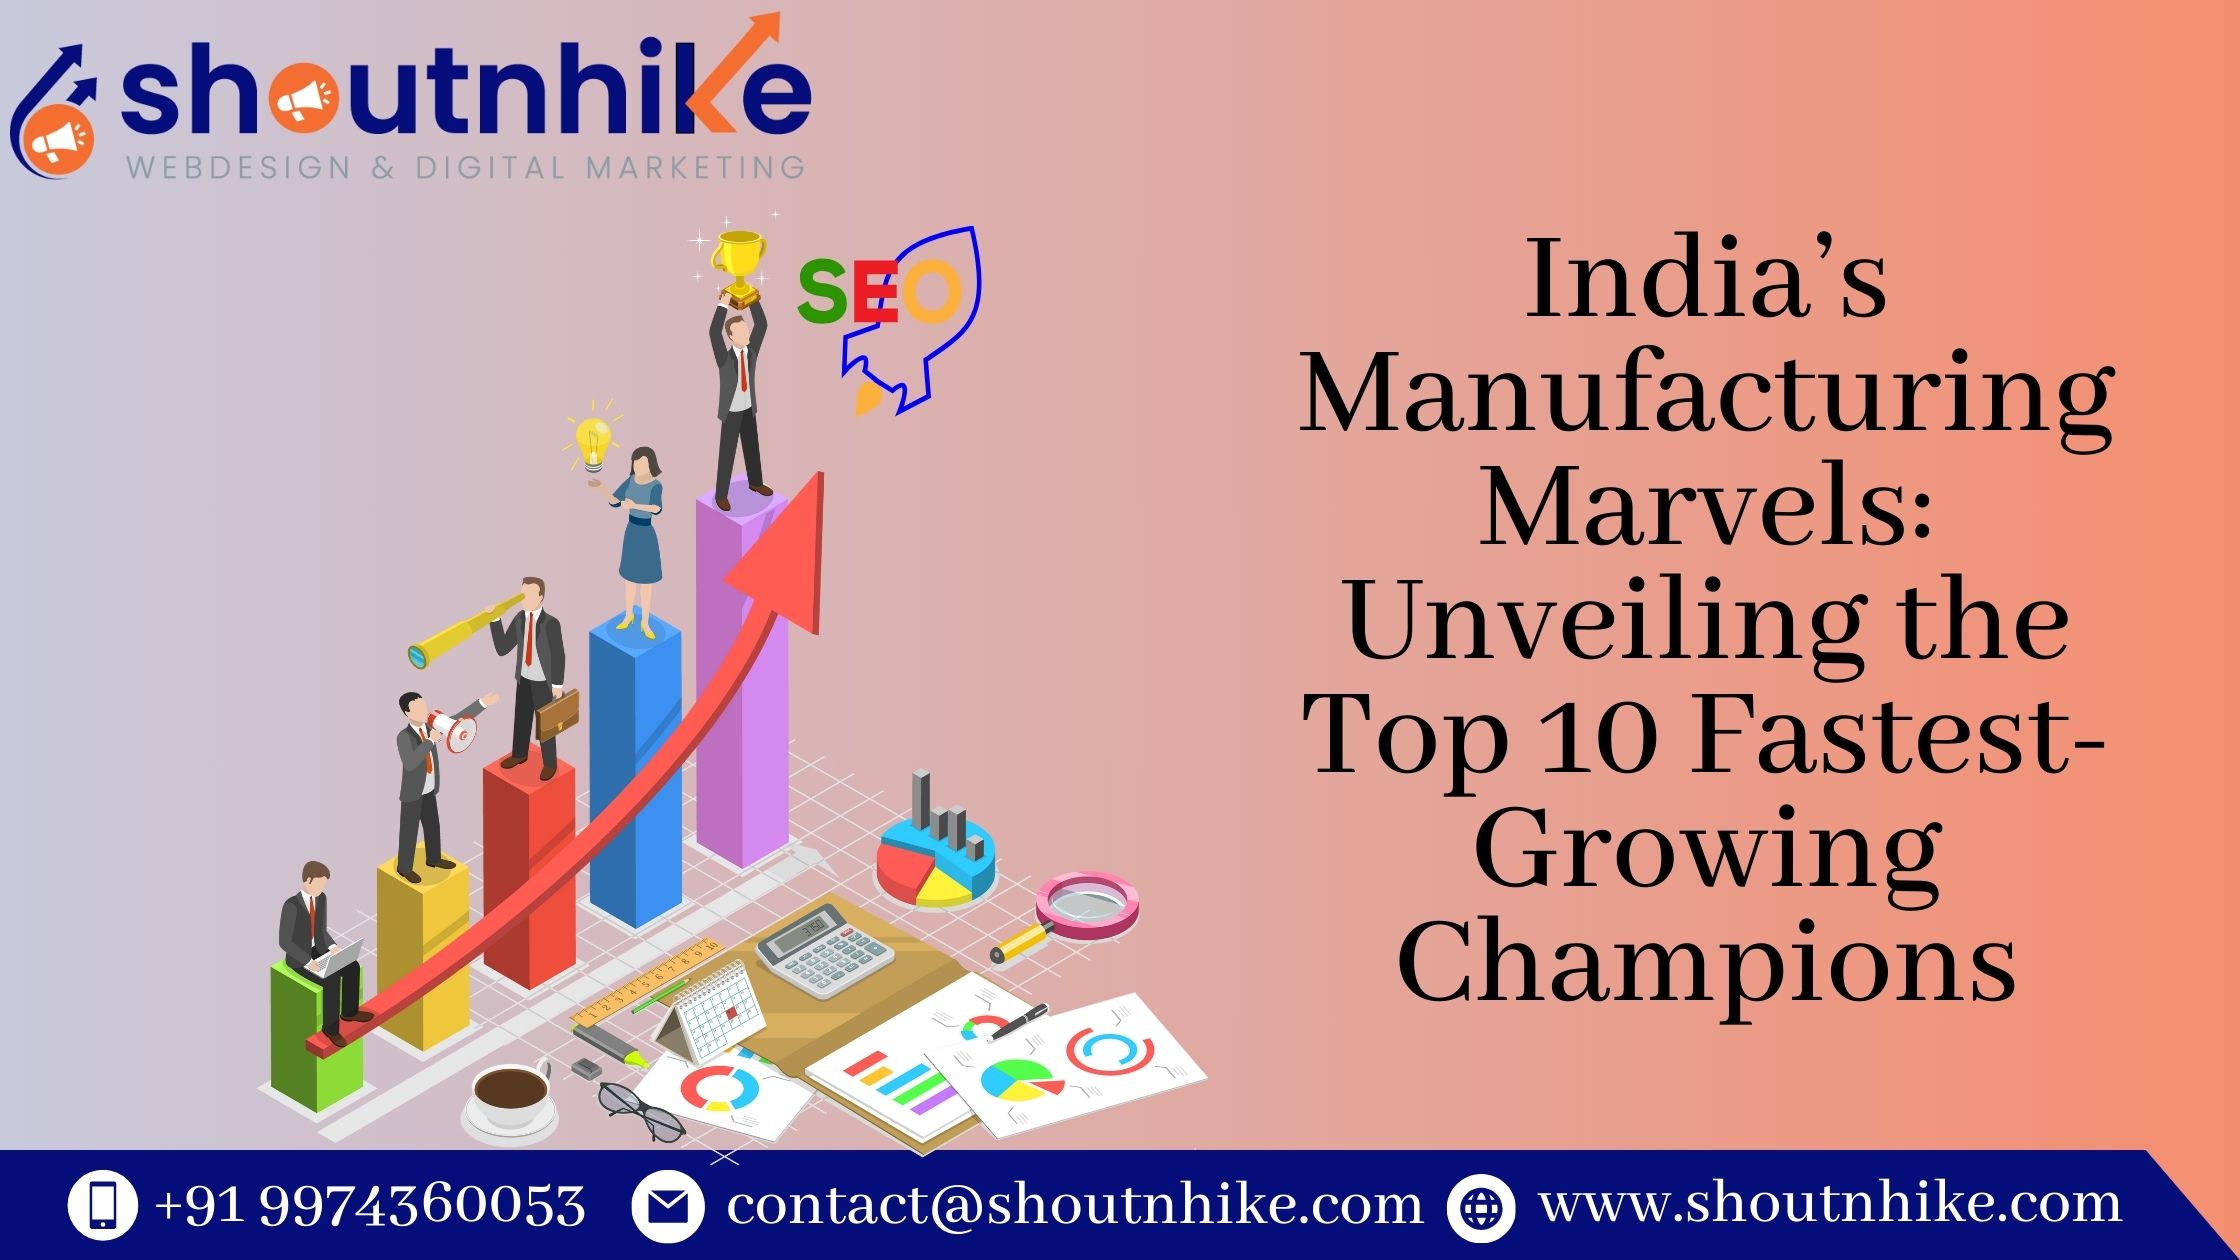 India’s Manufacturing Marvels: Unveiling the Top 10 Fastest-Growing Champions